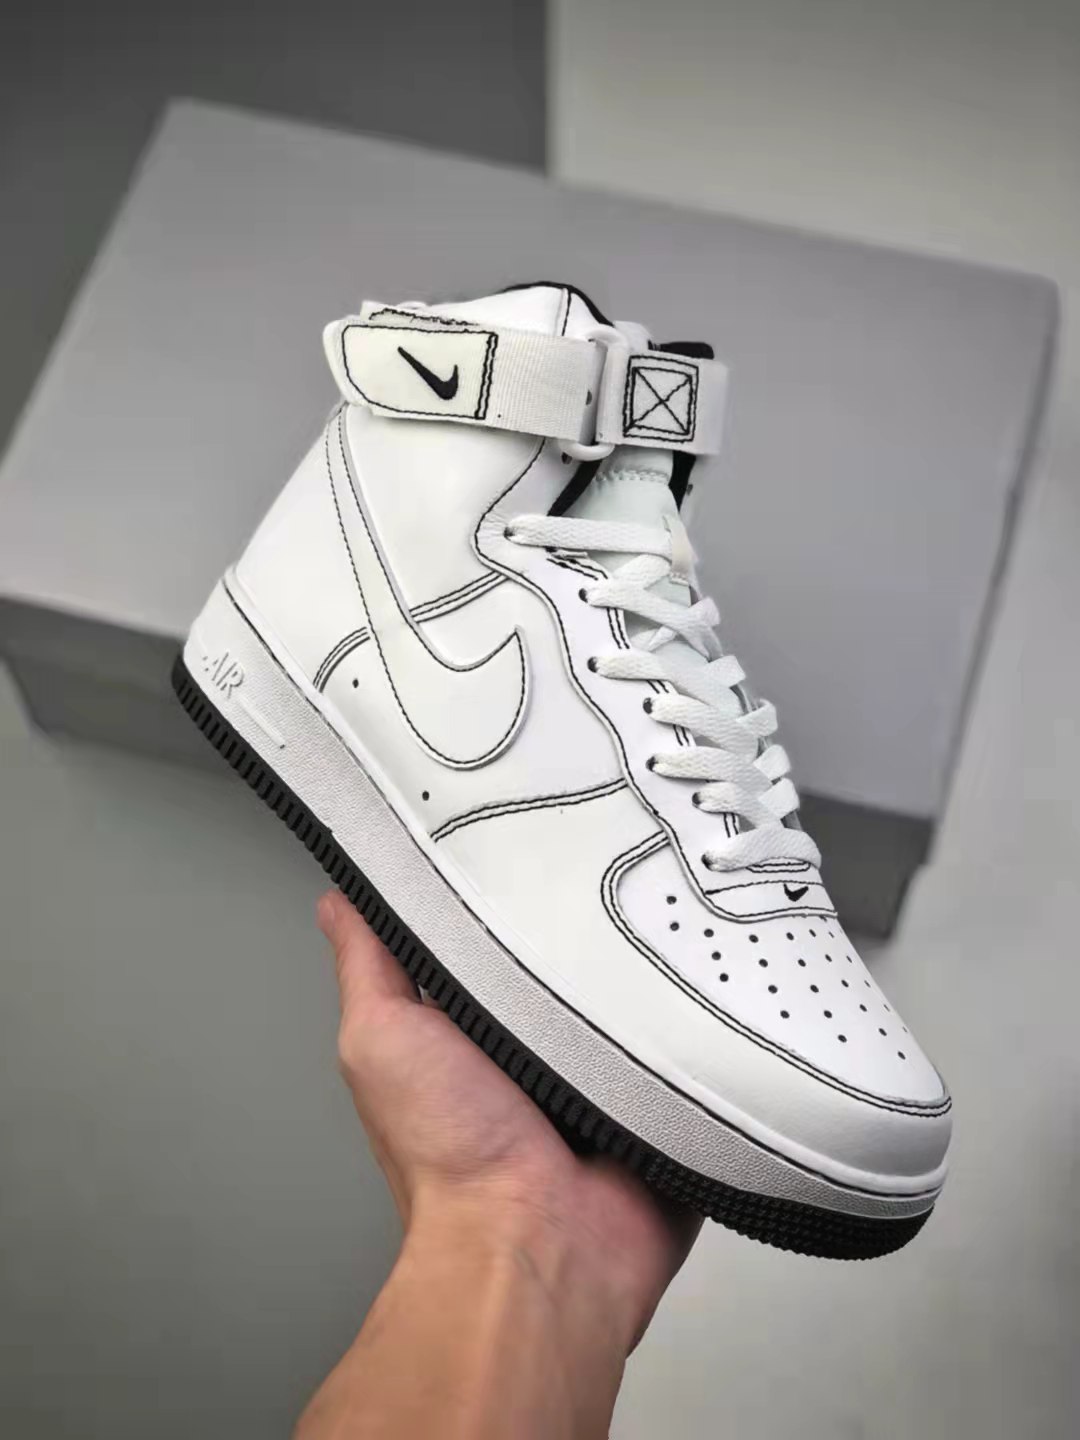 Nike Air Force 1 High 07 White Black CV1753-104 - Classic Design and Versatility at Its Best